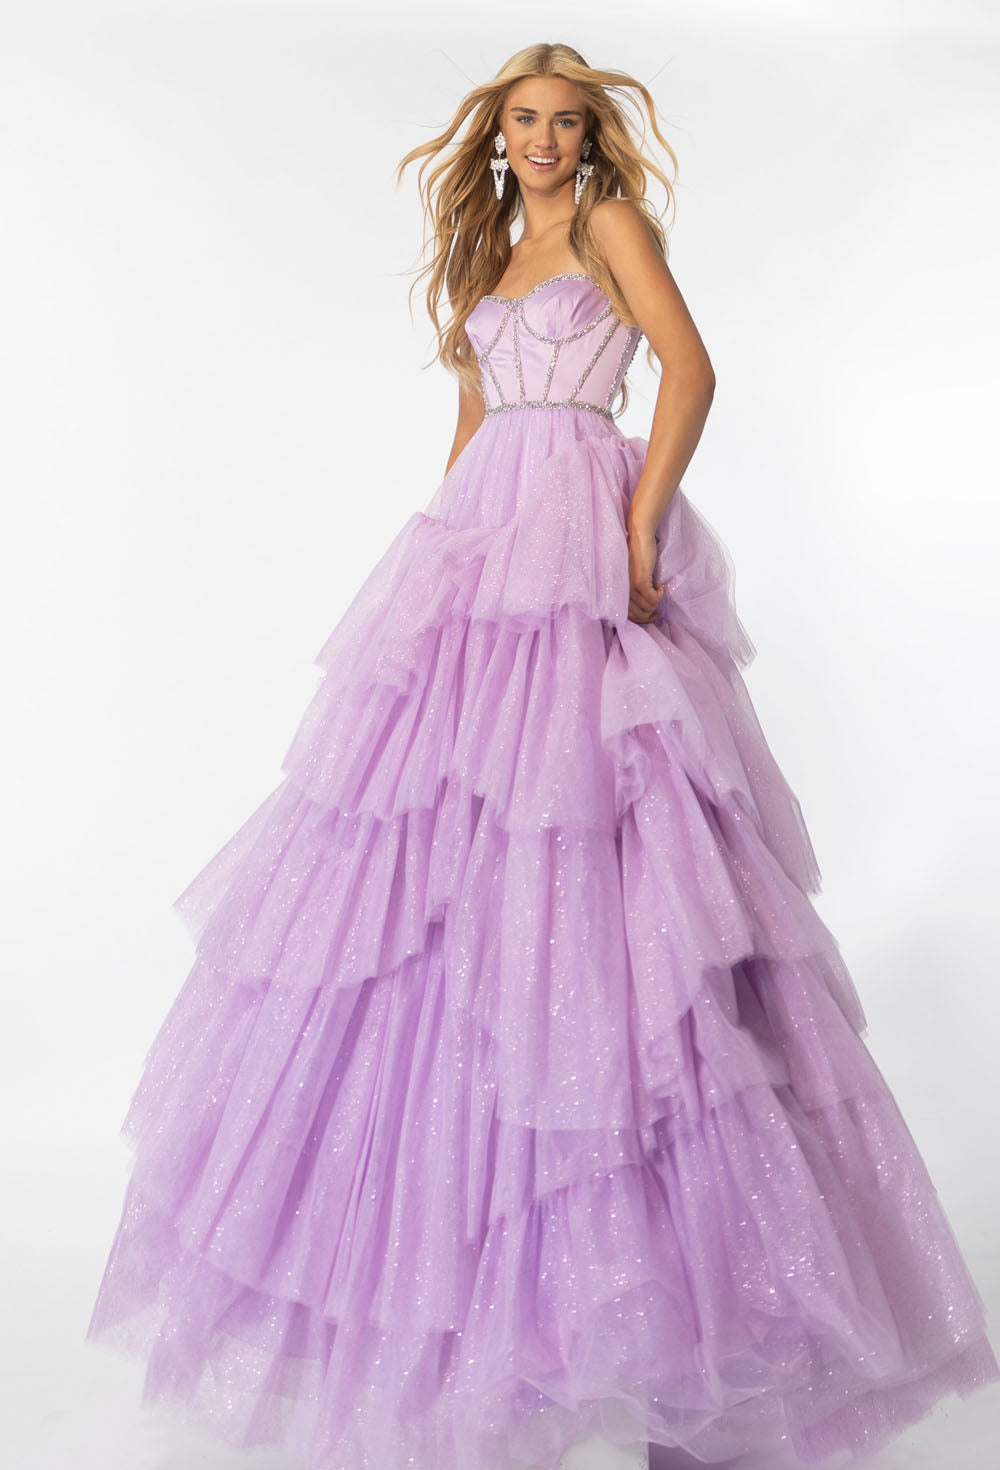 Ava Presley 28592 prom dresses images. Style 28592 by Ava Presley is available in these colors: Lilac, Black White.